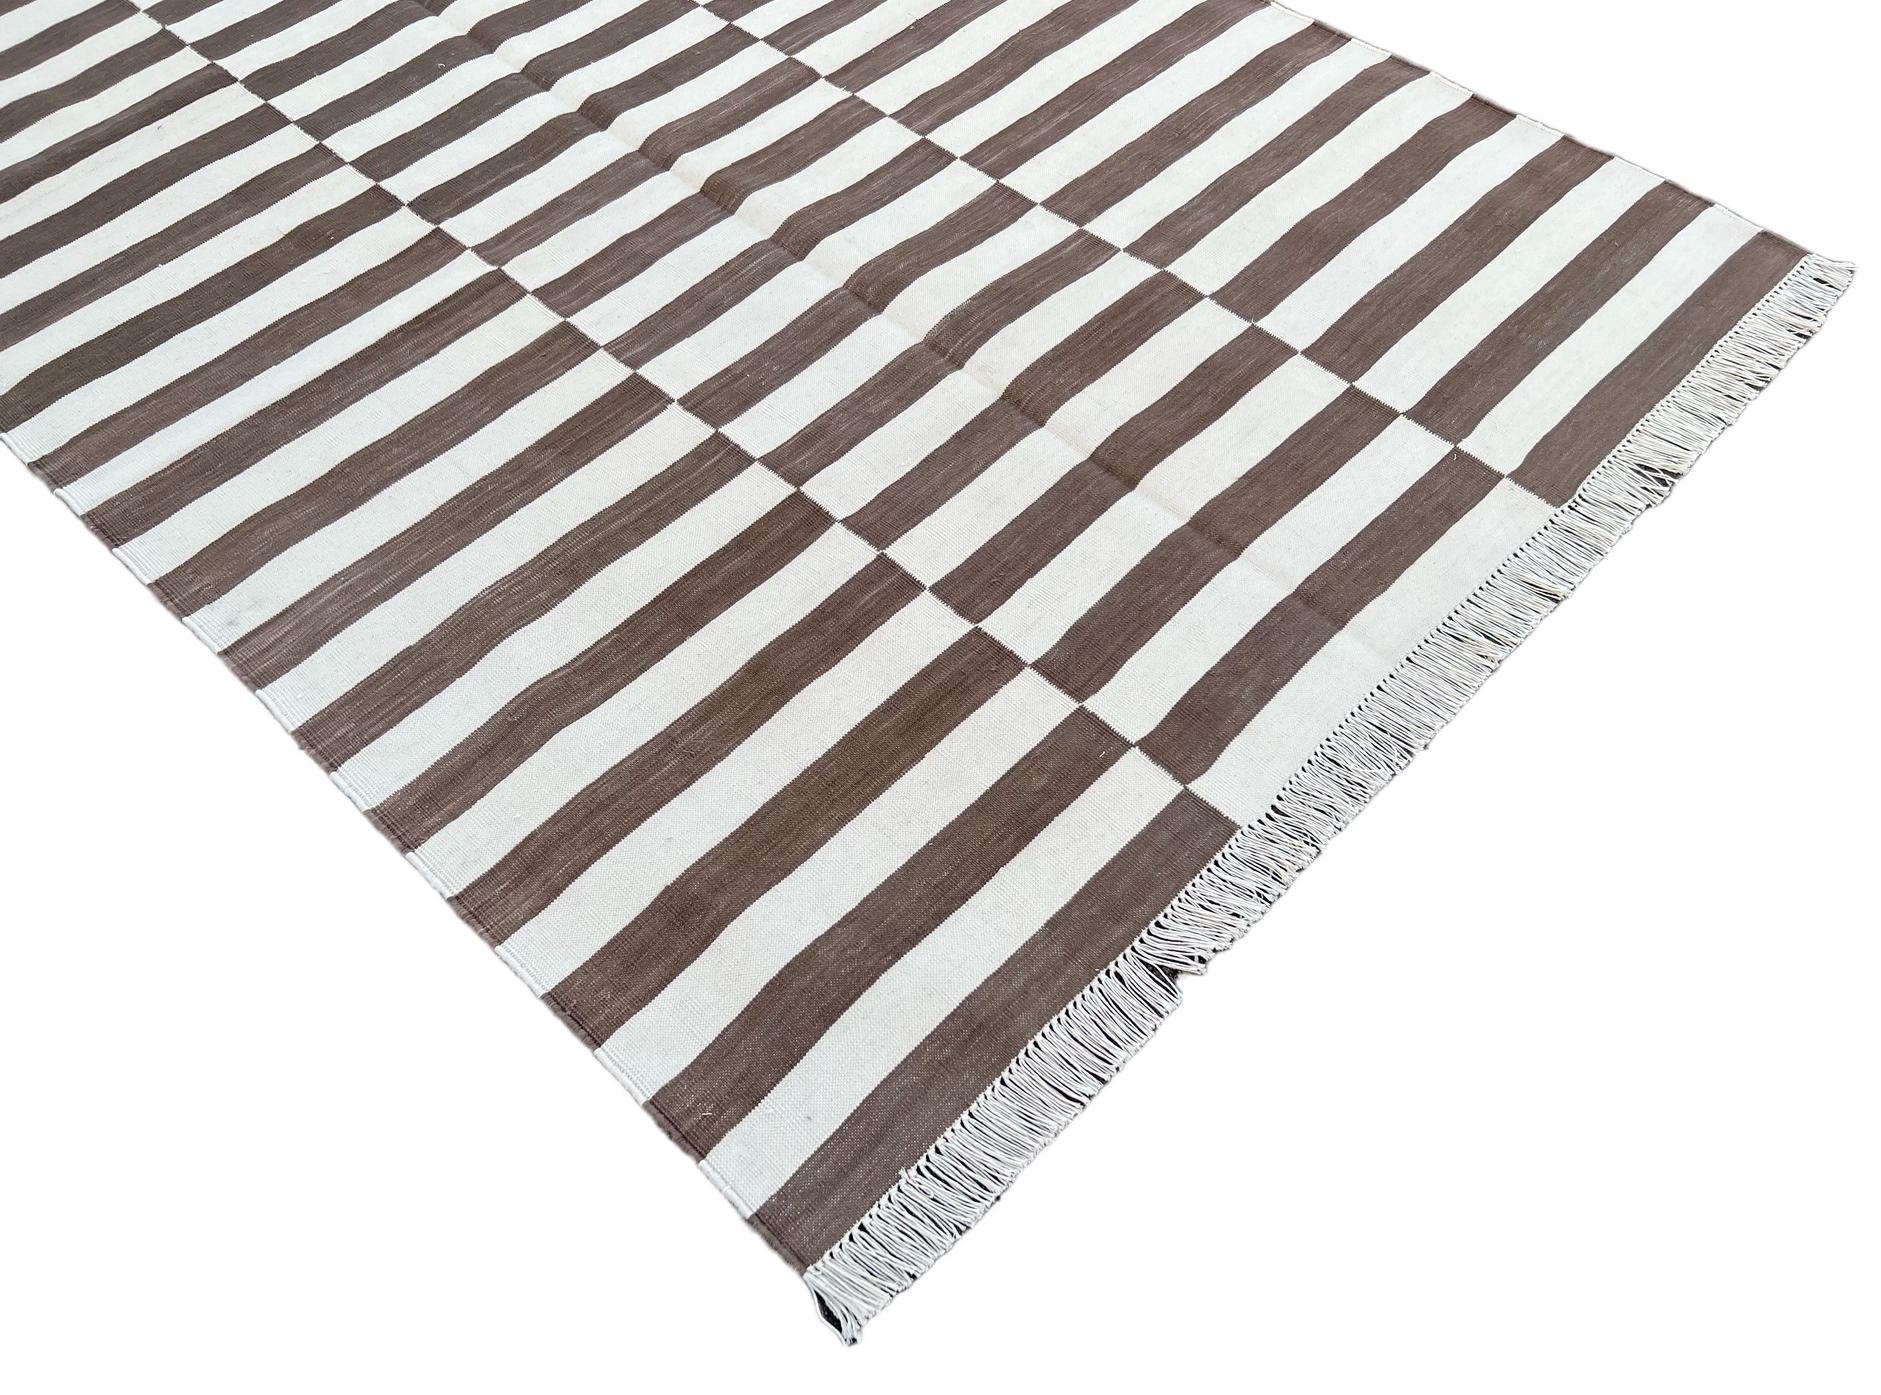 Contemporary Handmade Cotton Area Flat Weave Rug, 4x6 Brown And White Striped Indian Dhurrie For Sale